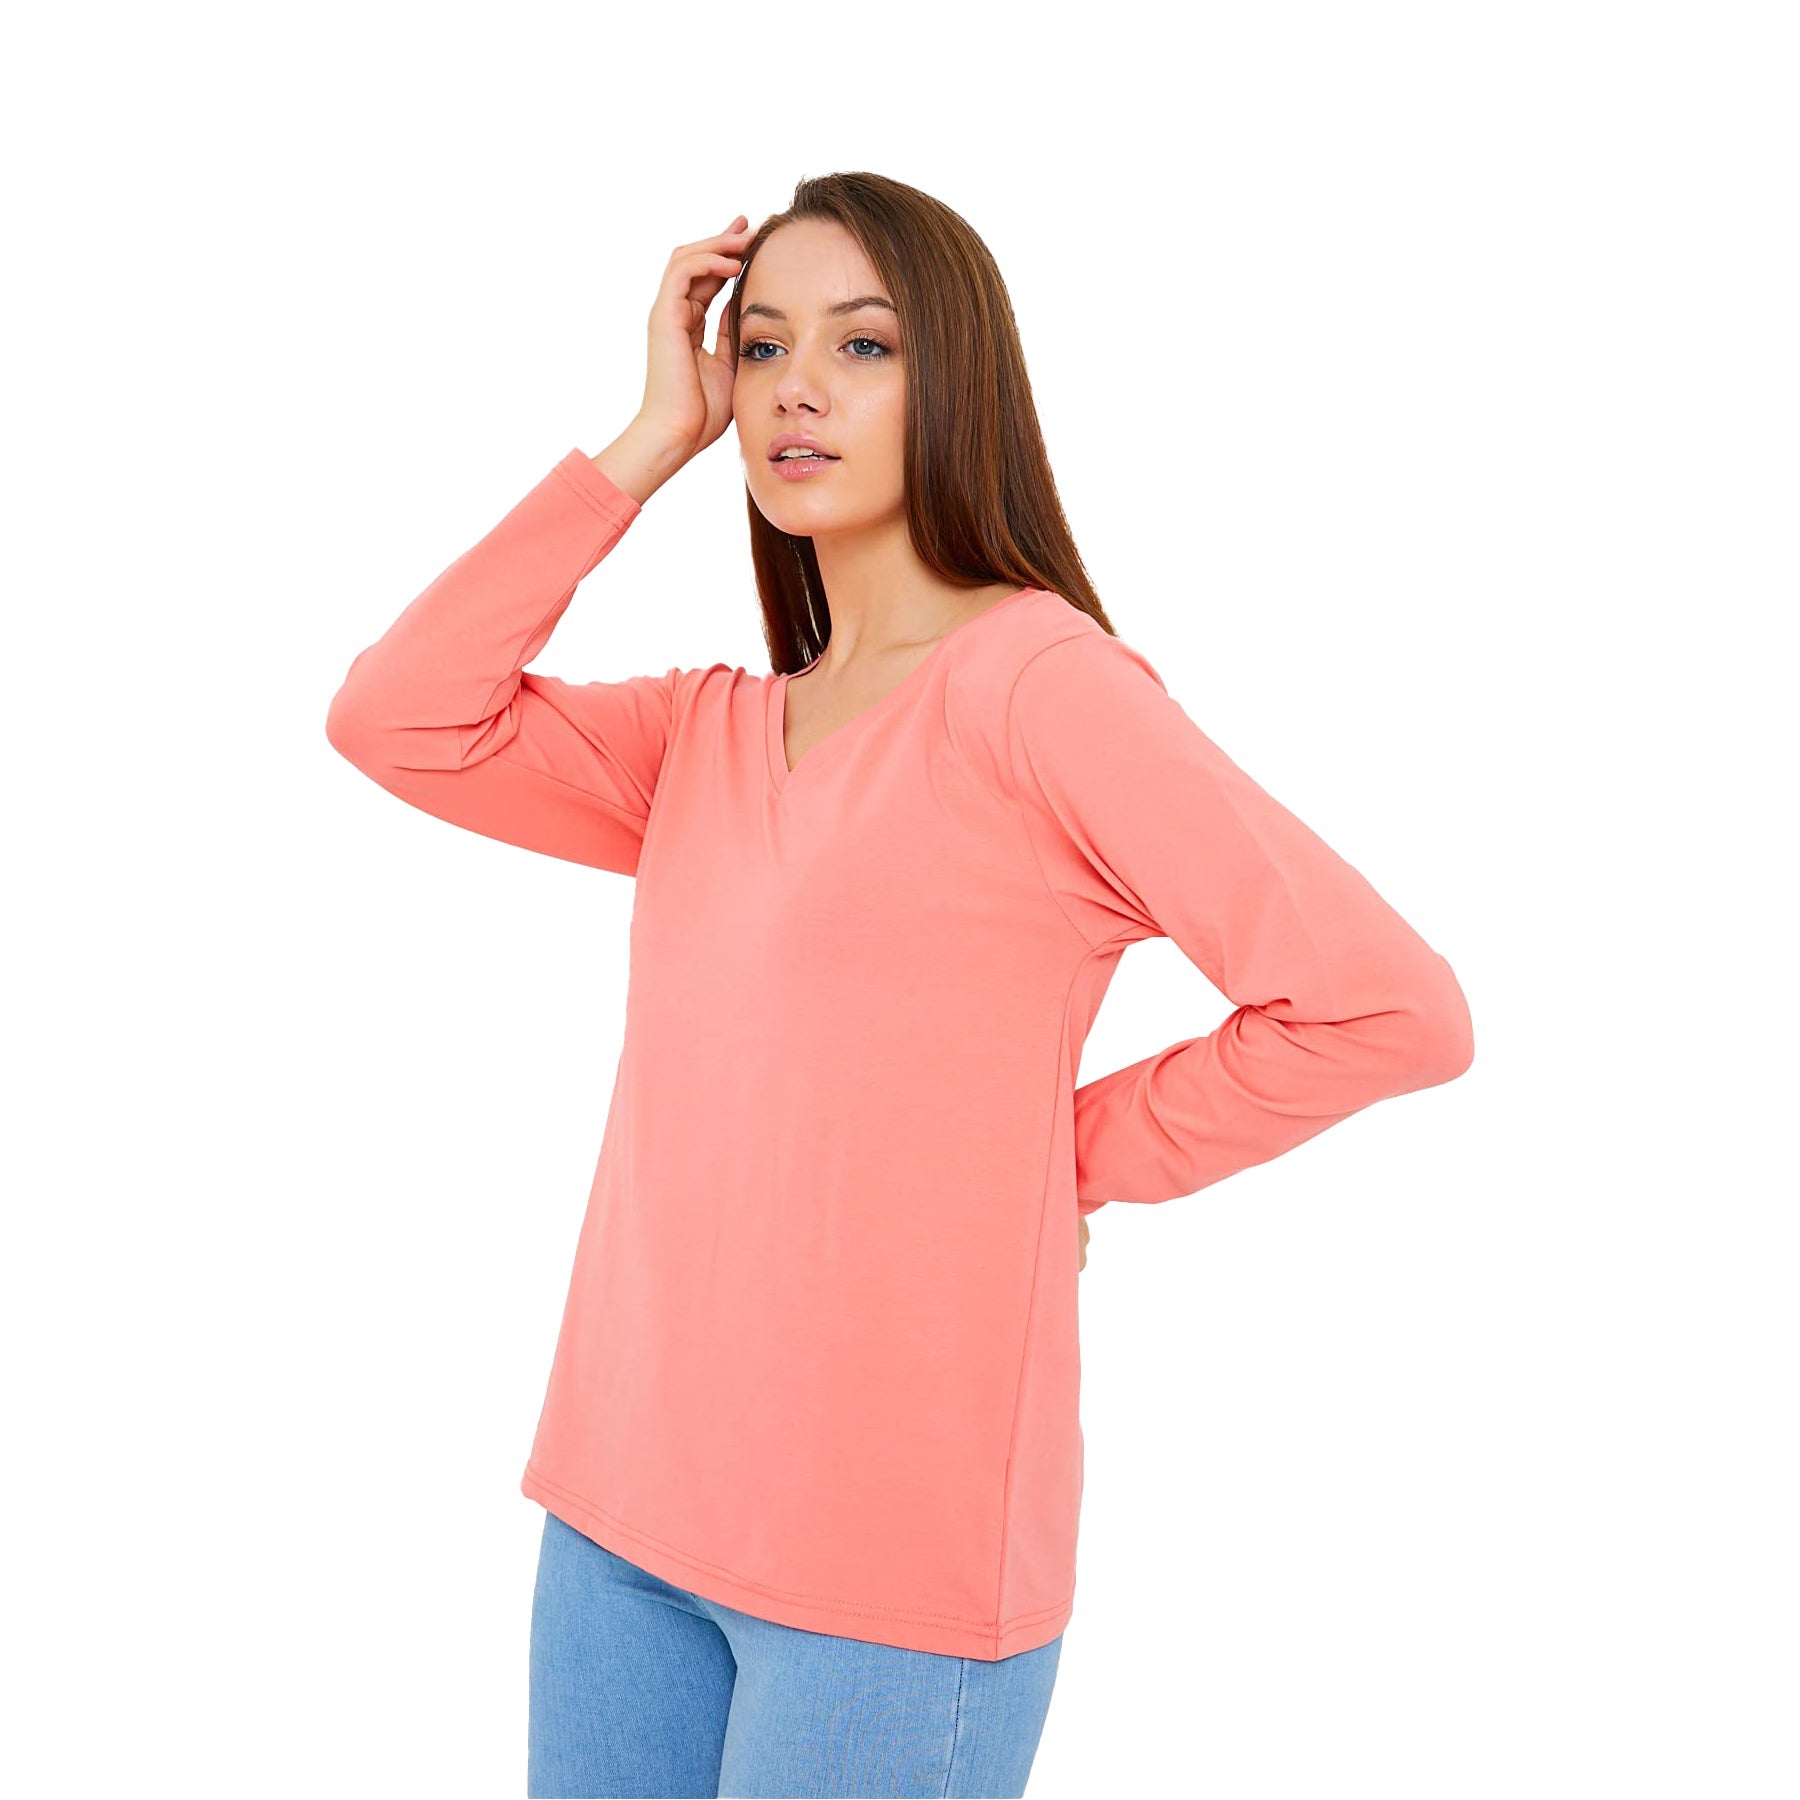 Long Sleeve V Neck T-Shirts for Women & Girls - Colorful Pima Cotton